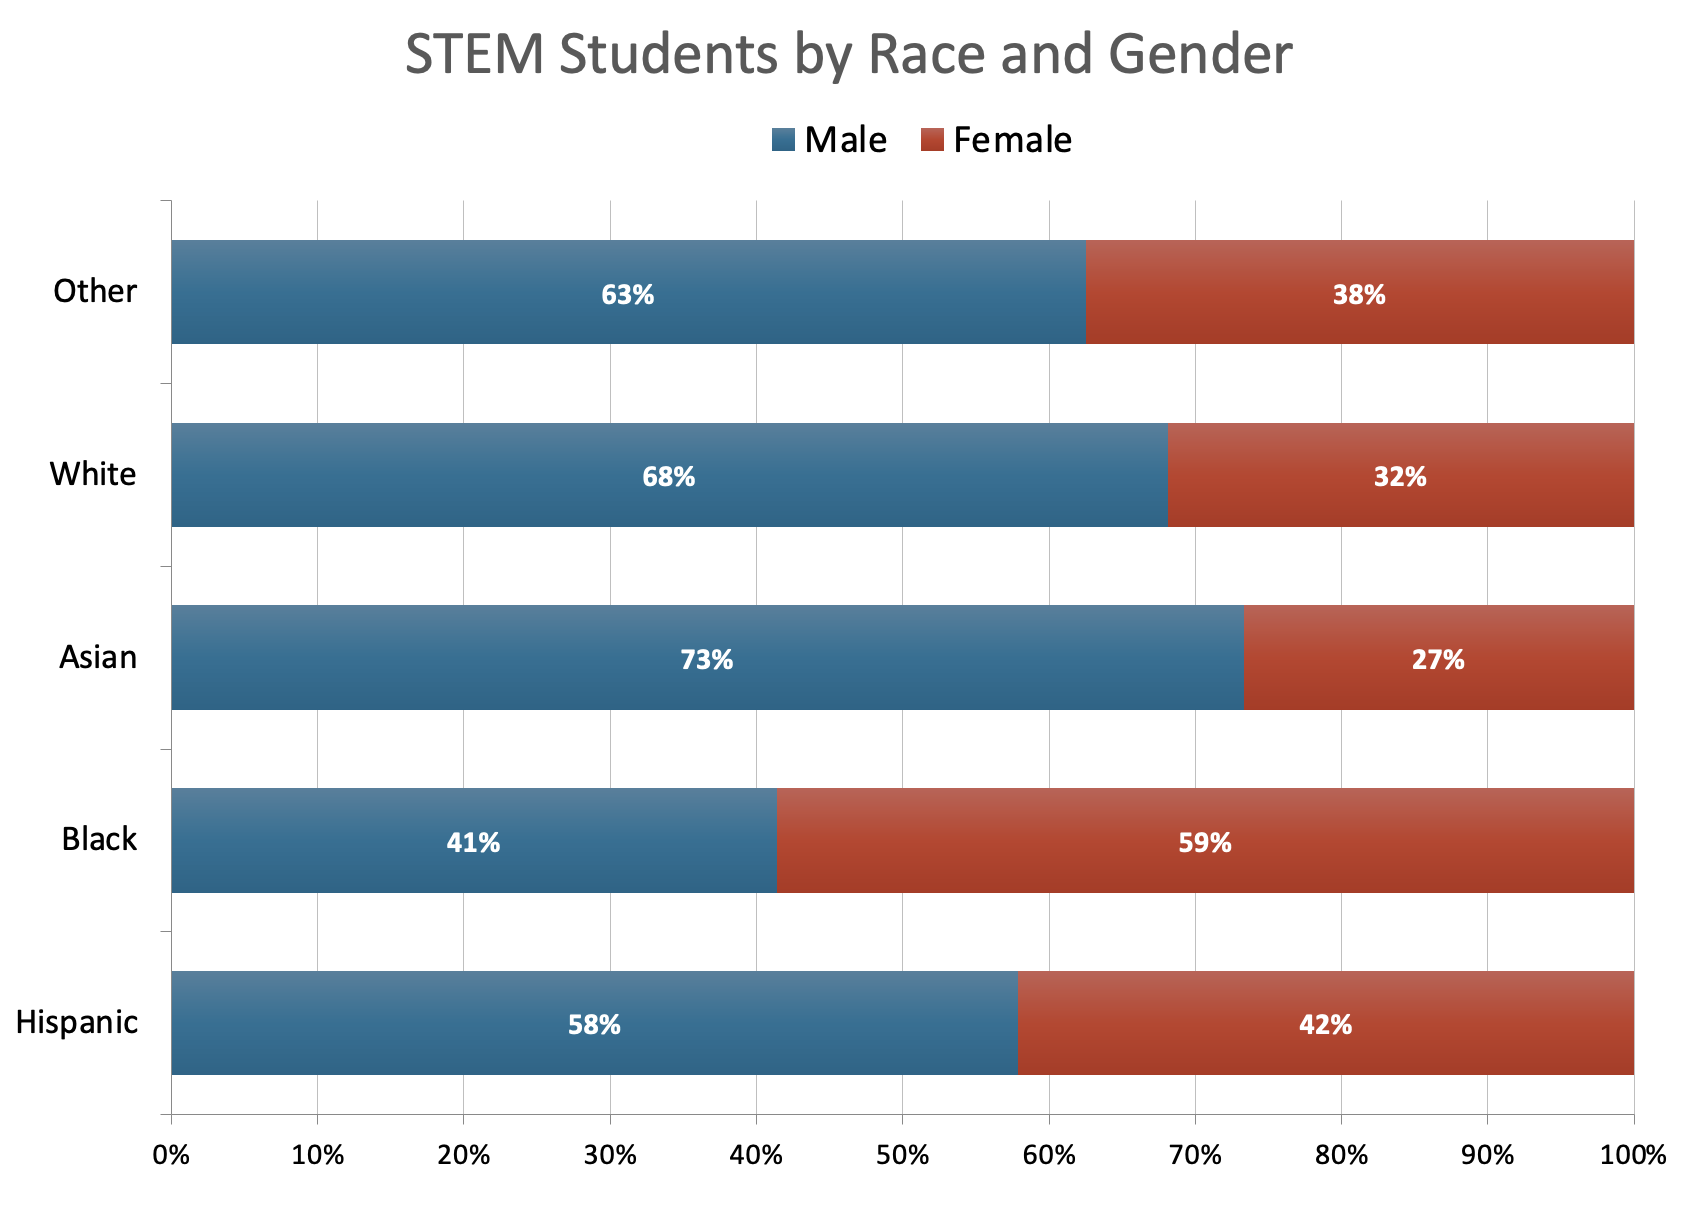 STEM students by race and gender